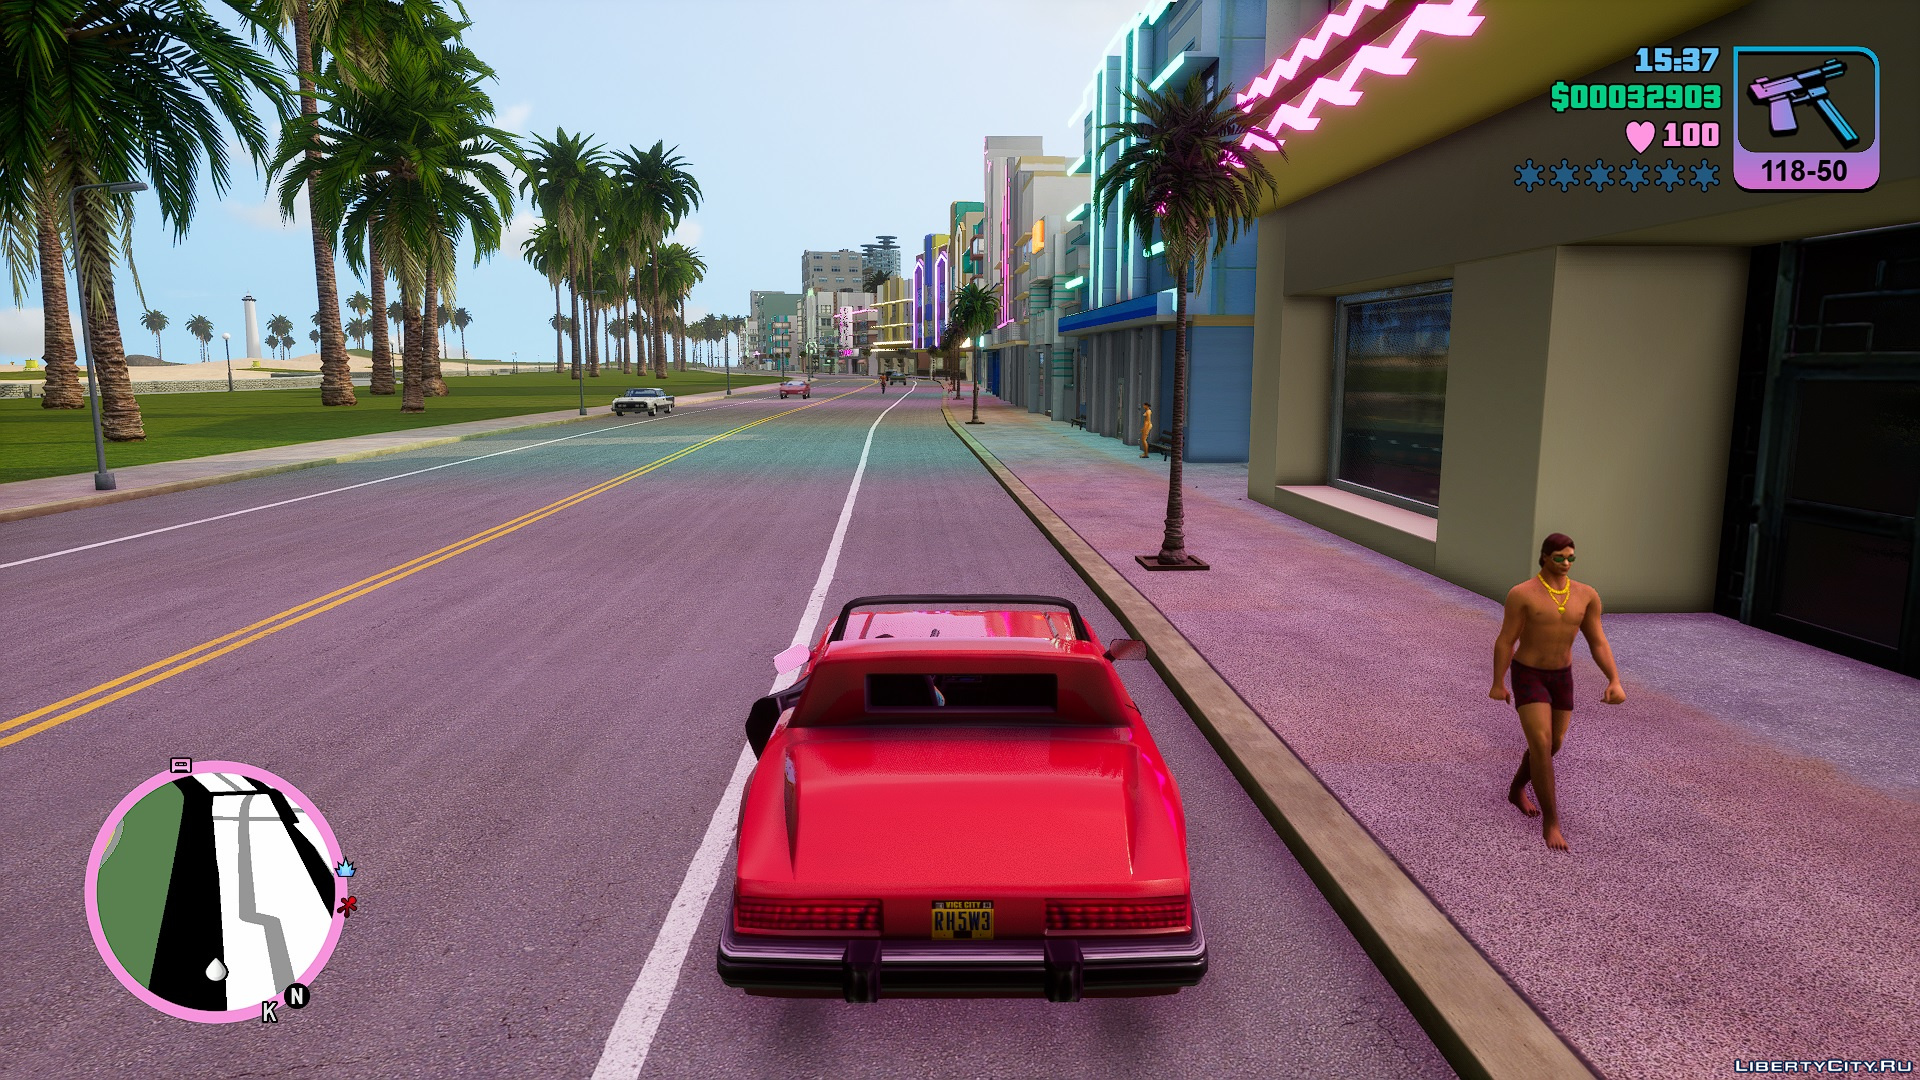 Mods For Gta Vice City The Definitive Edition 132 Mods For Gta Vice City The Definitive 